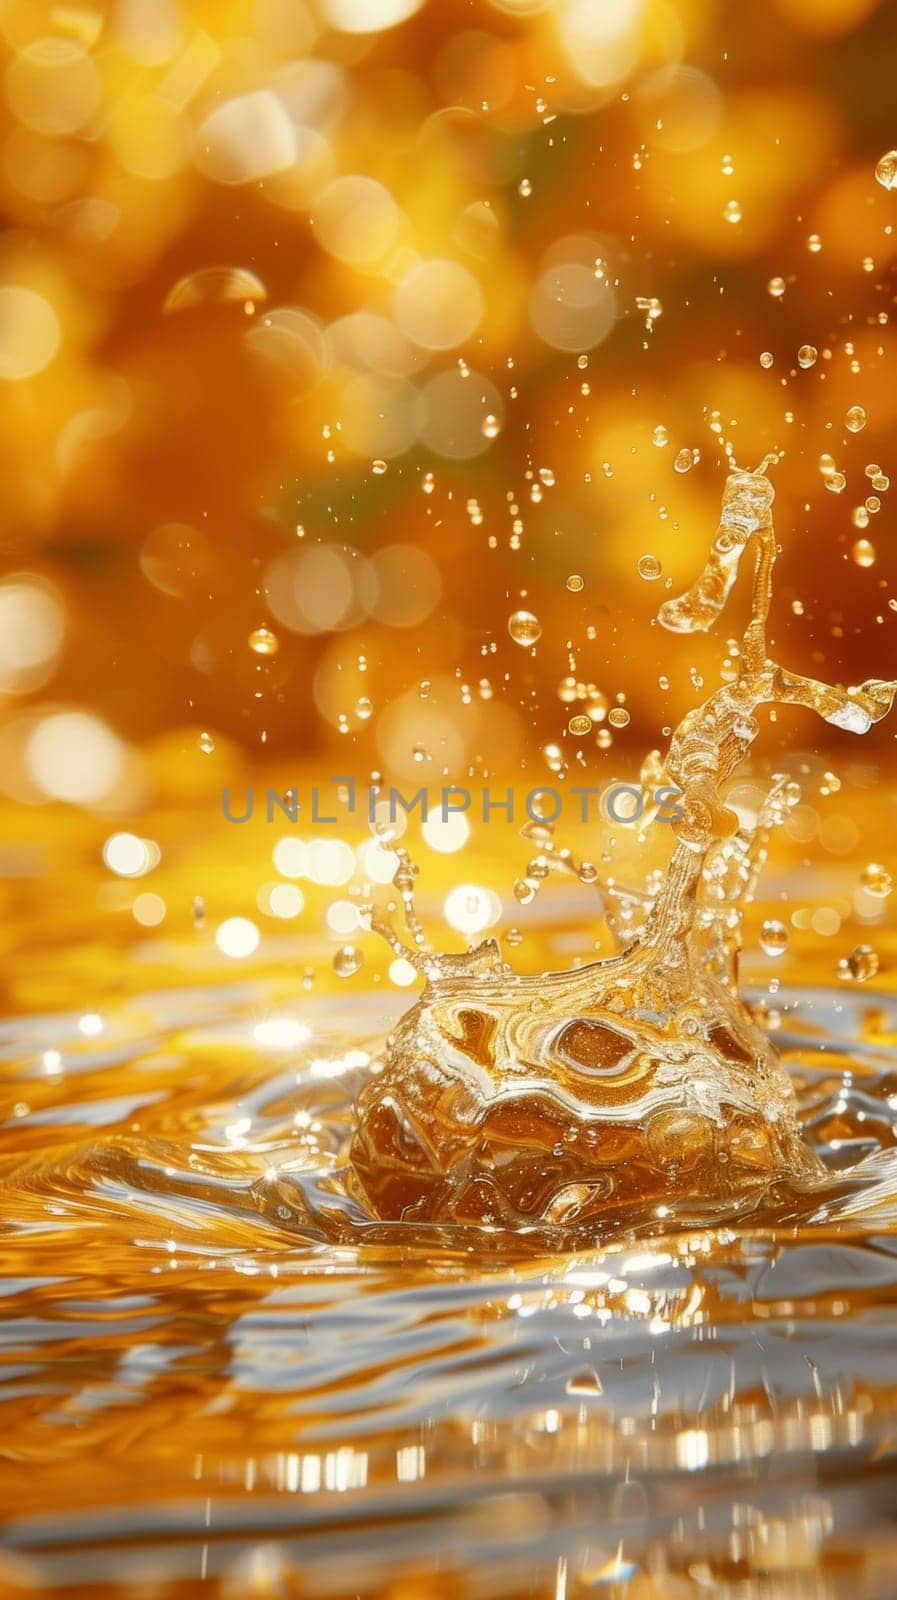 A close up of a glass filled with water and bubbles